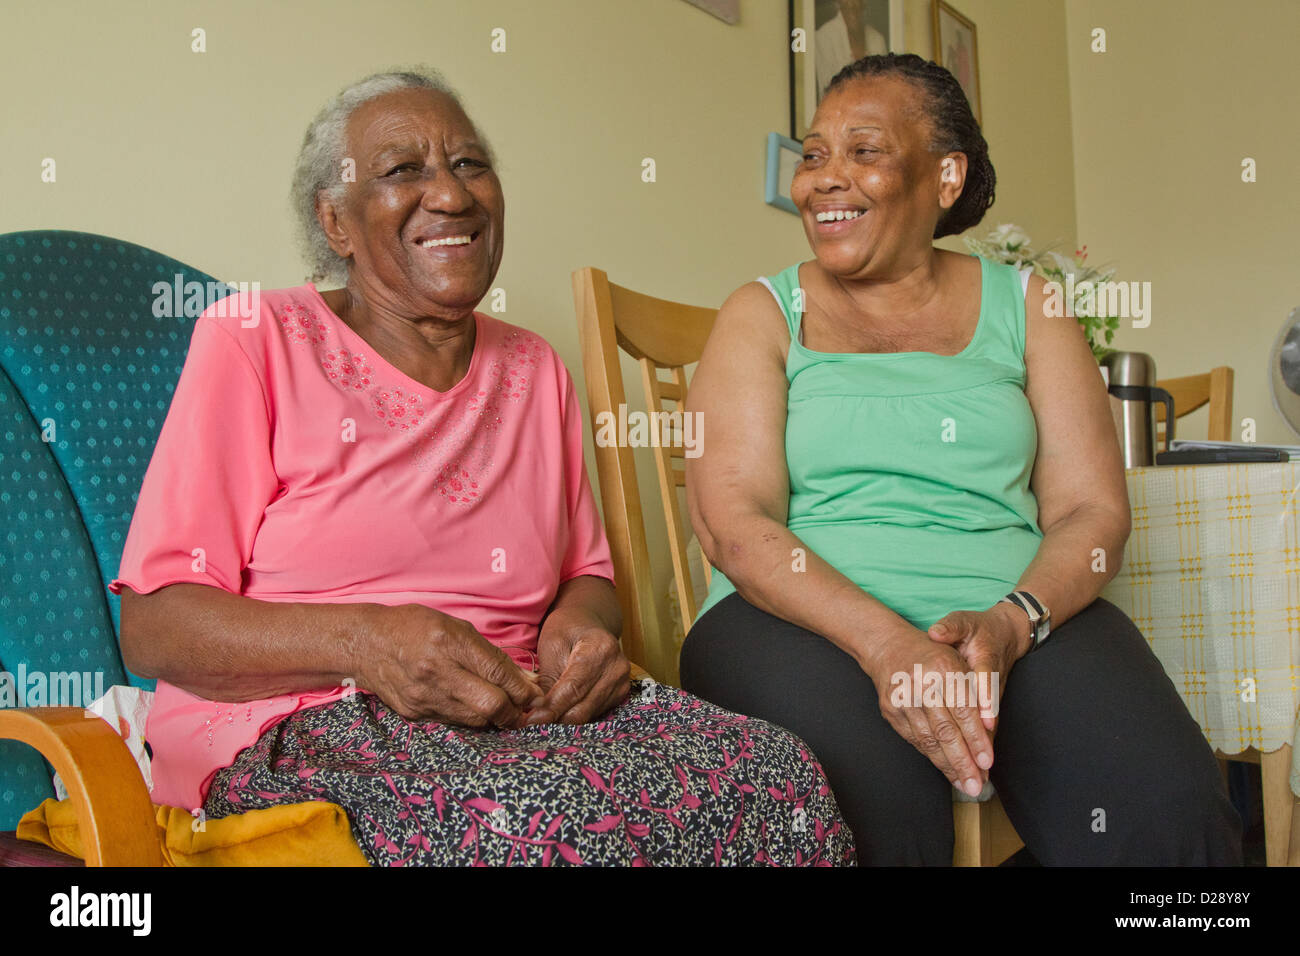 Carer and elderly visually impaired woman laughing Stock Photo